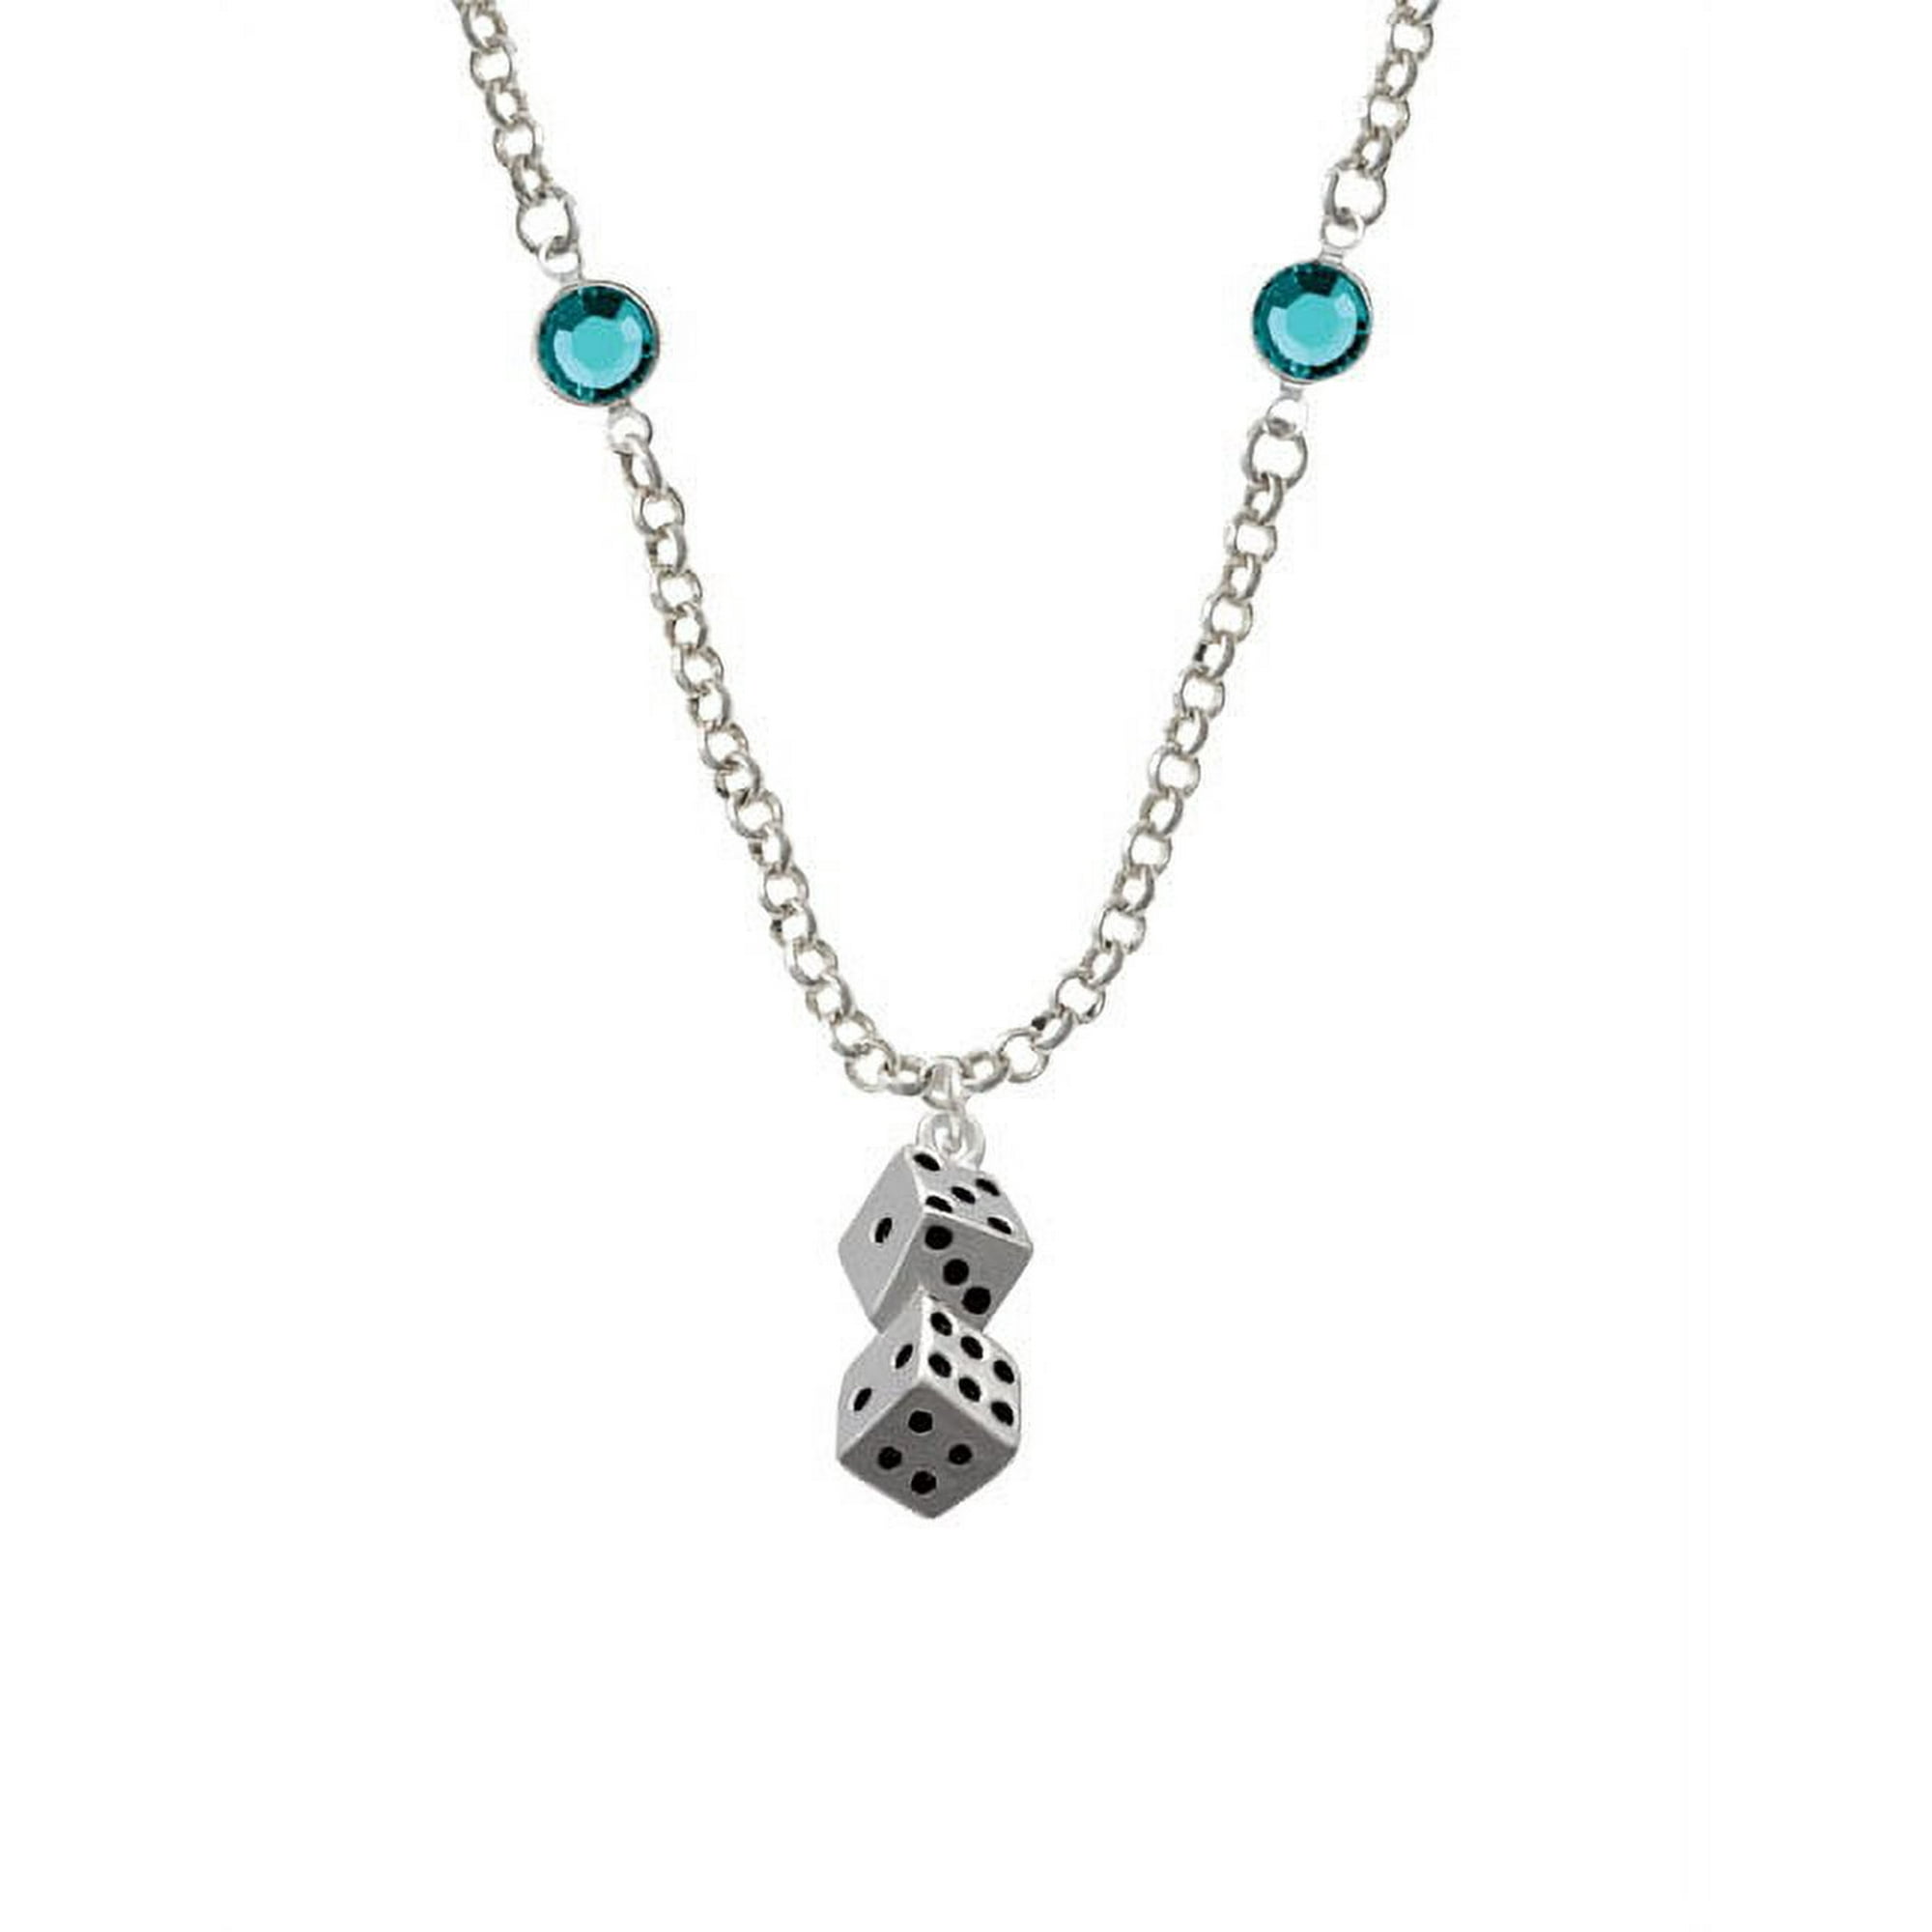 Pair of Dice Teal Crystal Fiona Necklace 